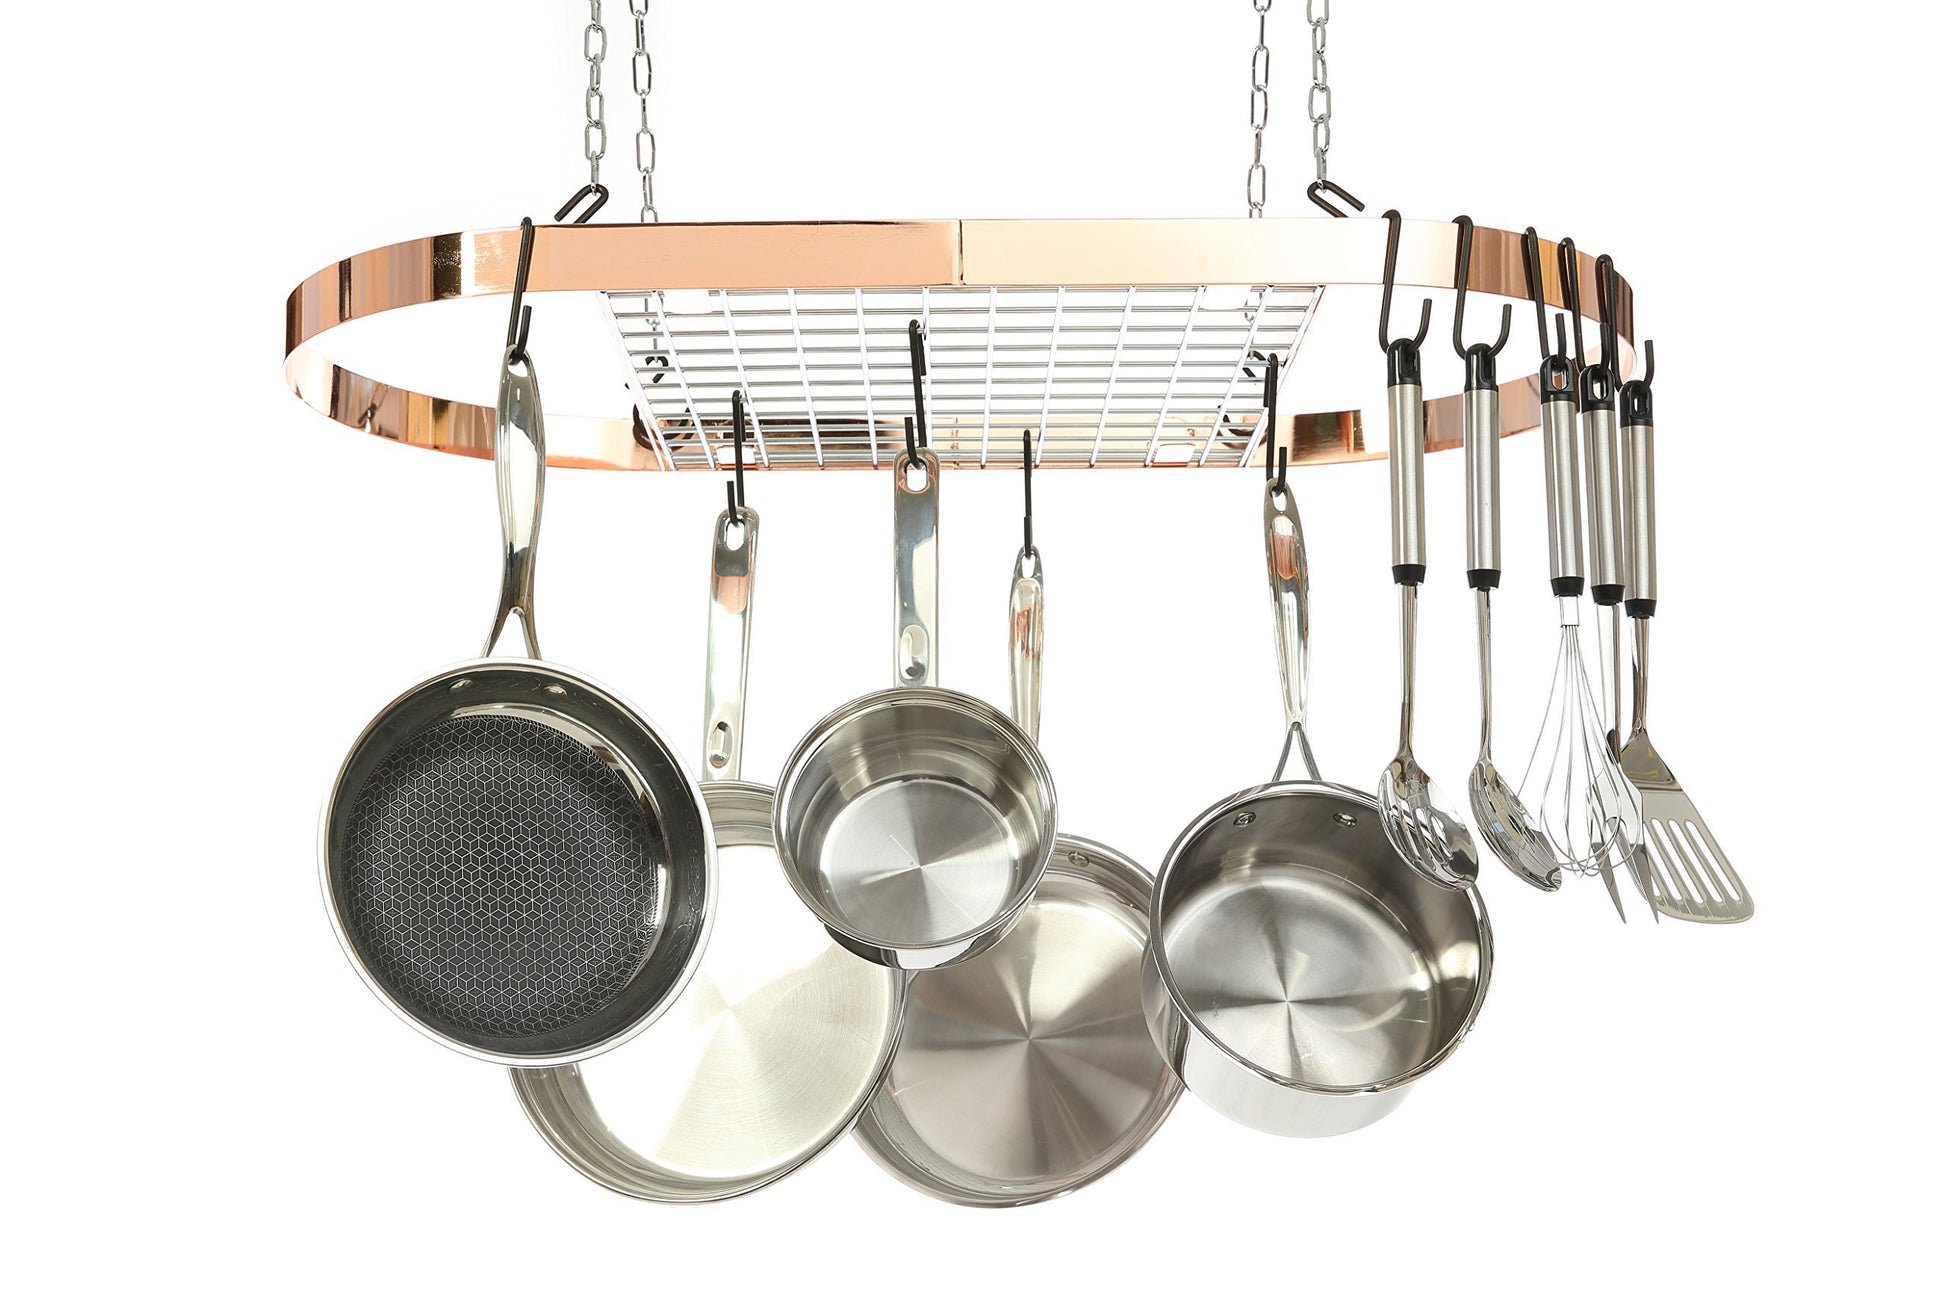 Discover kinetic pot and pan rack with ceiling hooks premium oval mounted oragnizer rack with multi purpose kitchen organization and storage for home restaurant cookware utensils hanging metallic copper